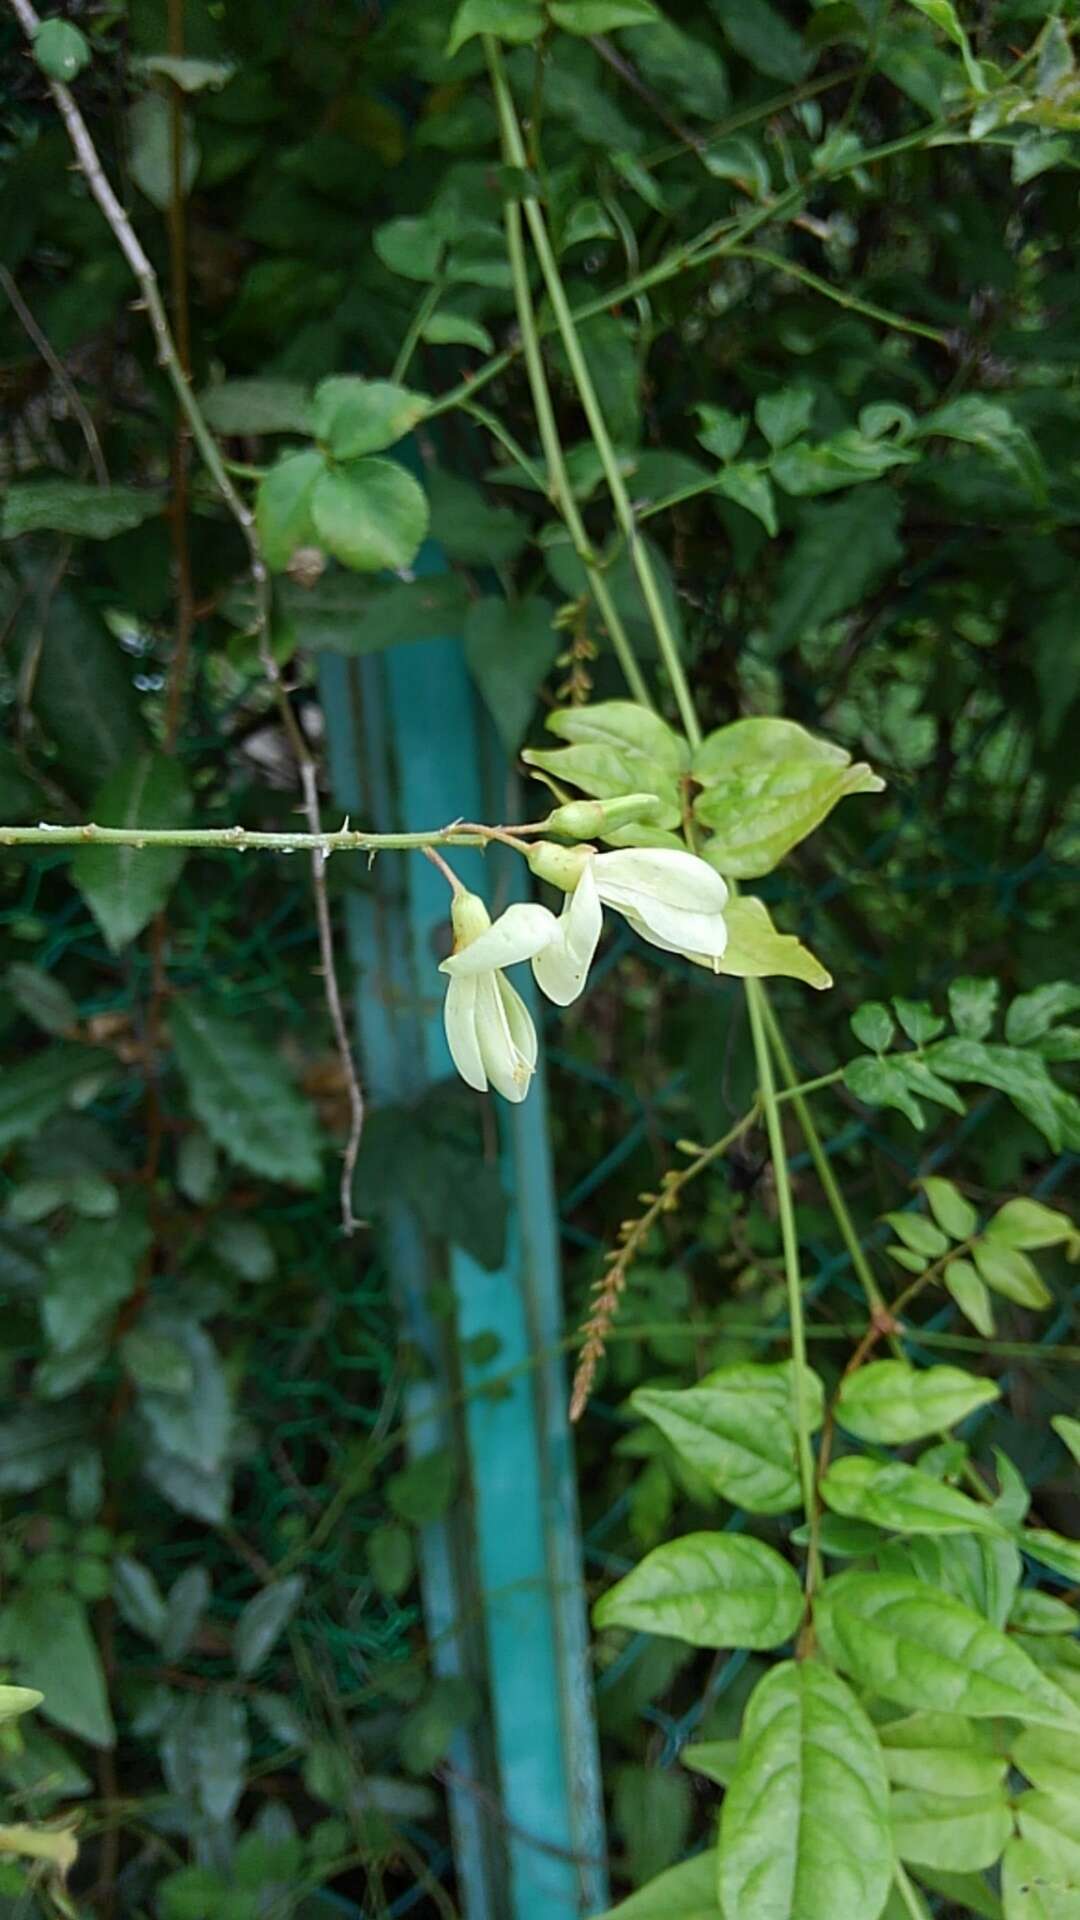 Image of Wisteriopsis japonica